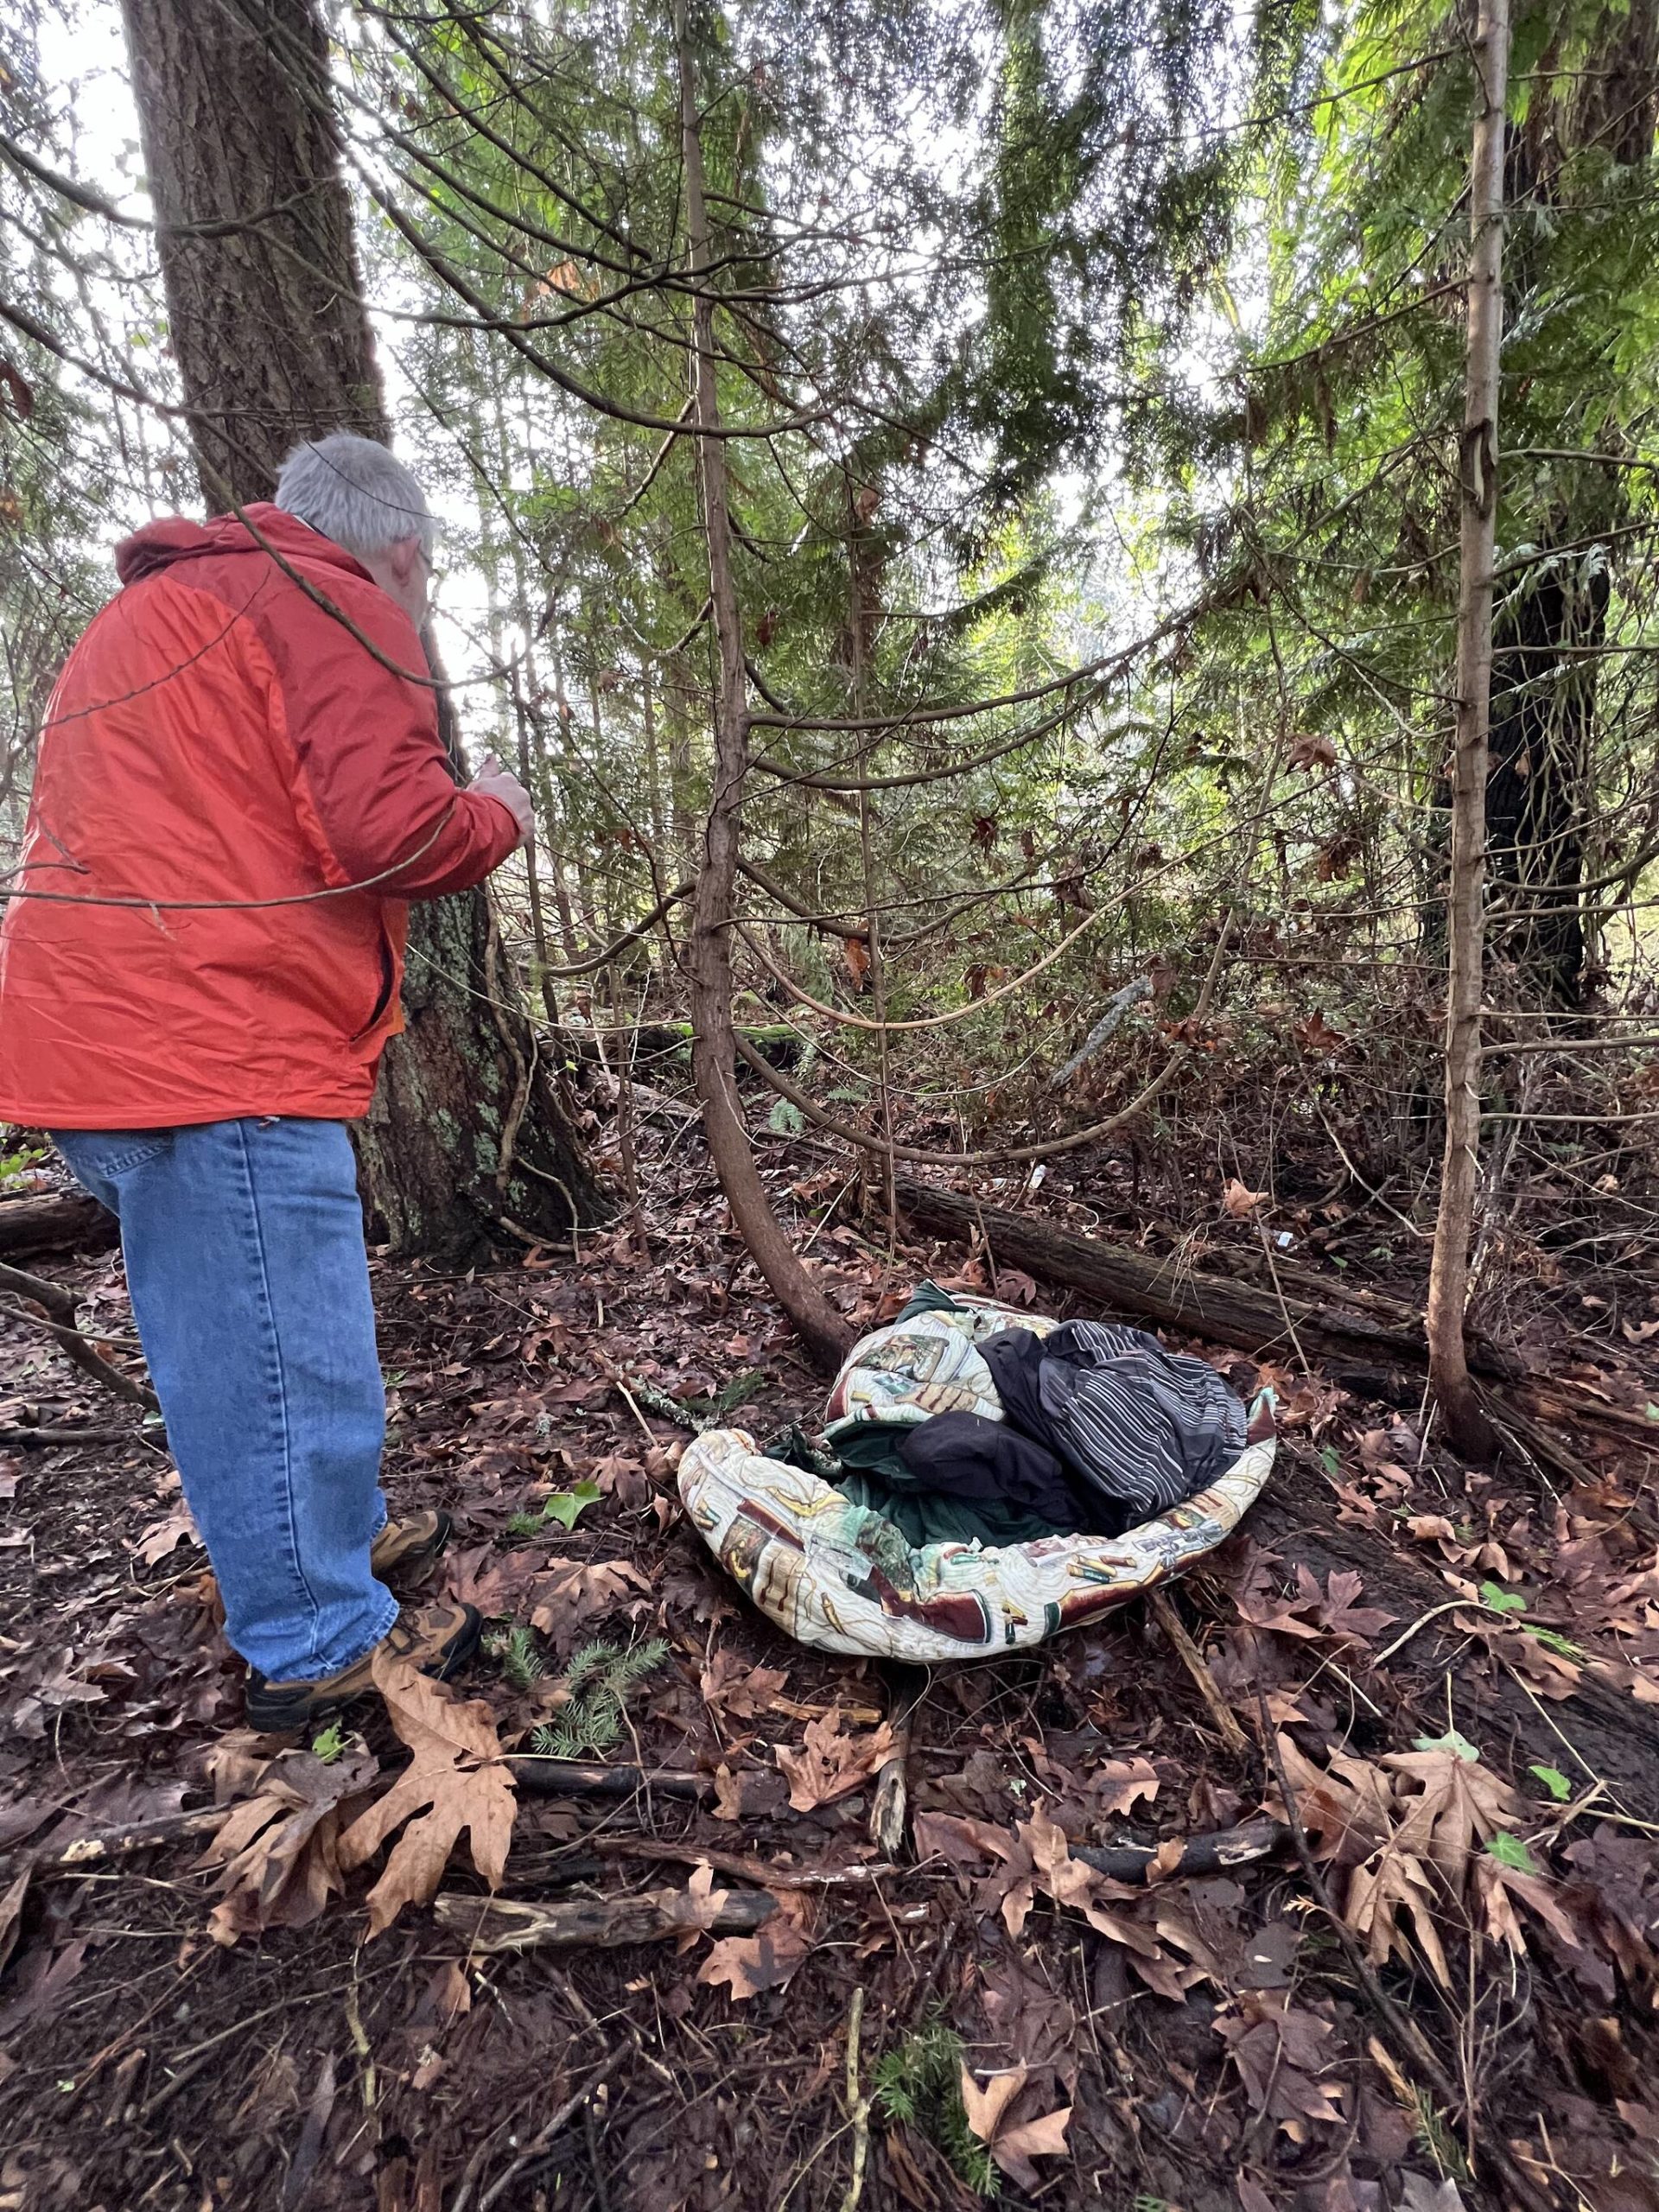 John Dembowski takes a closer look at a sleeping spot in a park in Poulsbo.